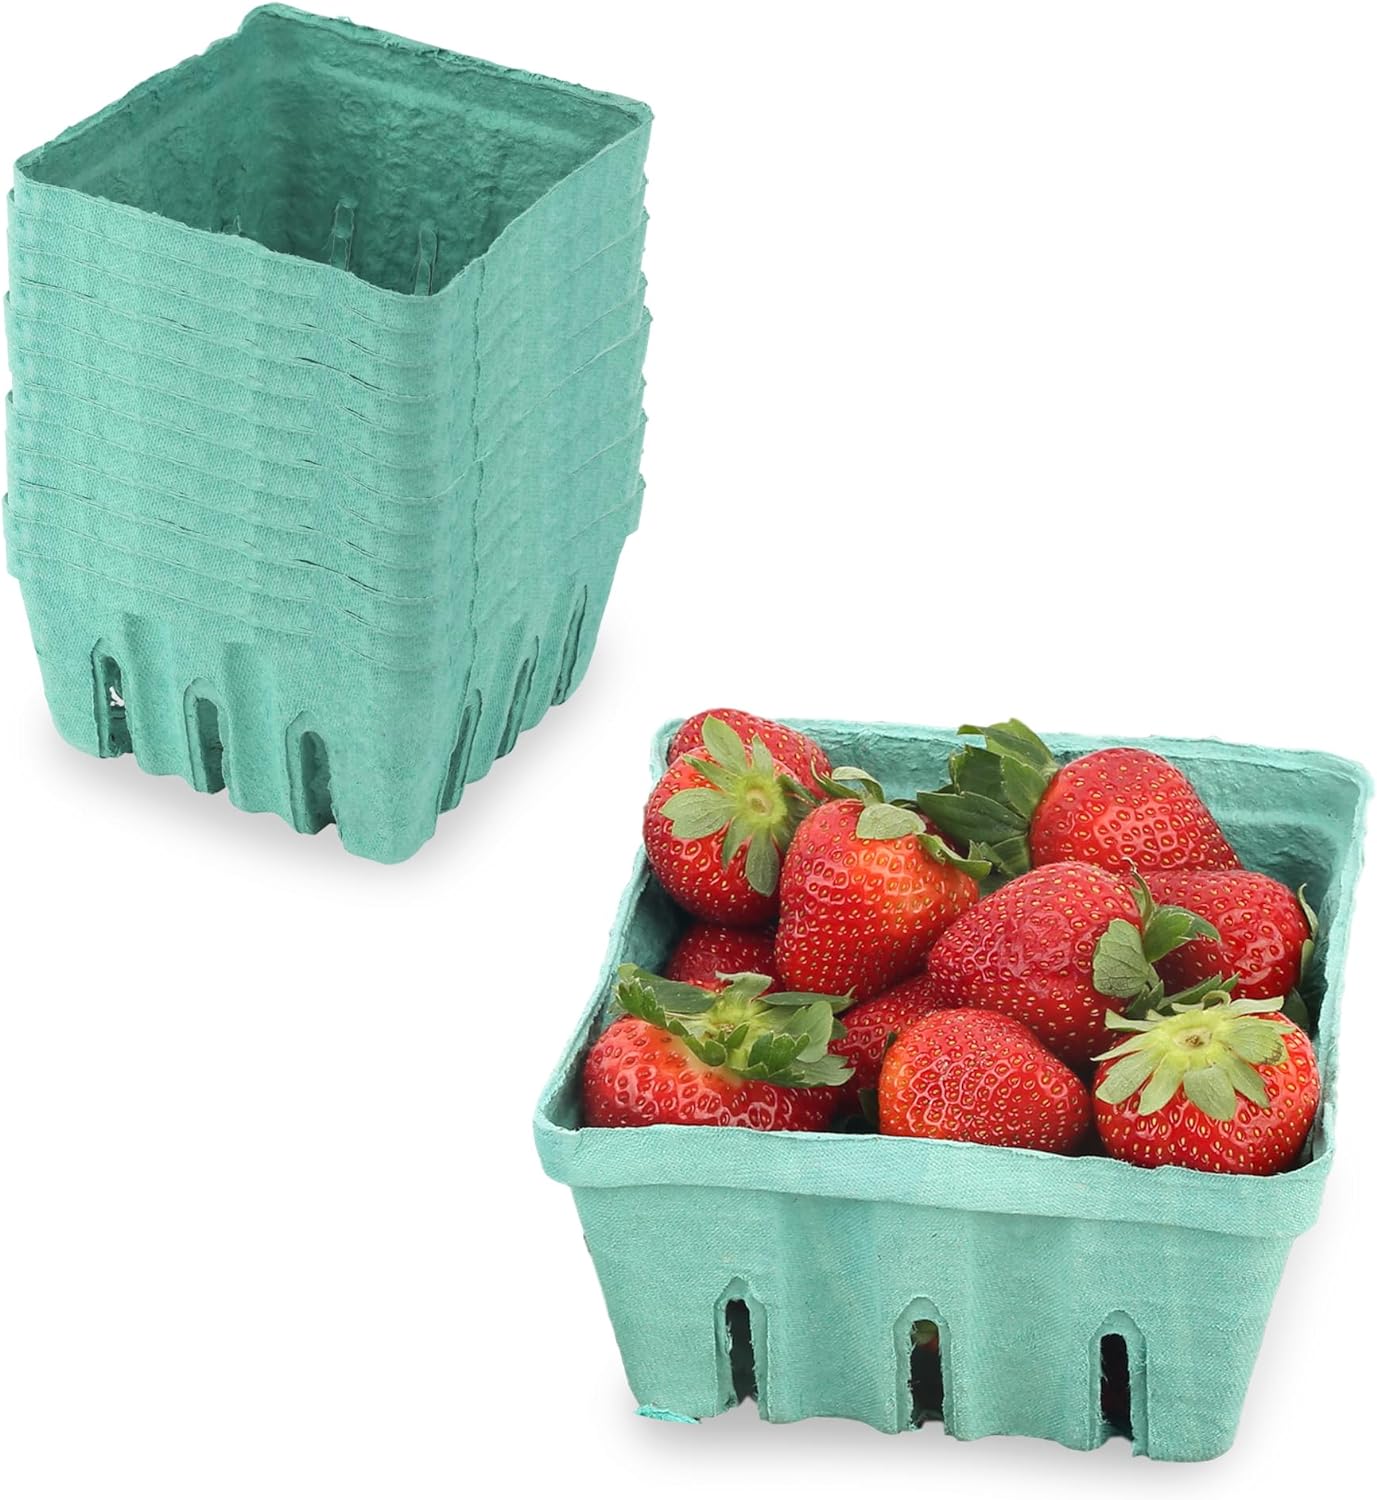  Green Molded Pulp Fiber Produce Vented Berry Basket 1/2 Pint  for Packaging Fruits and Veggies by MT Products - (15 Pieces) - Made in The  USA